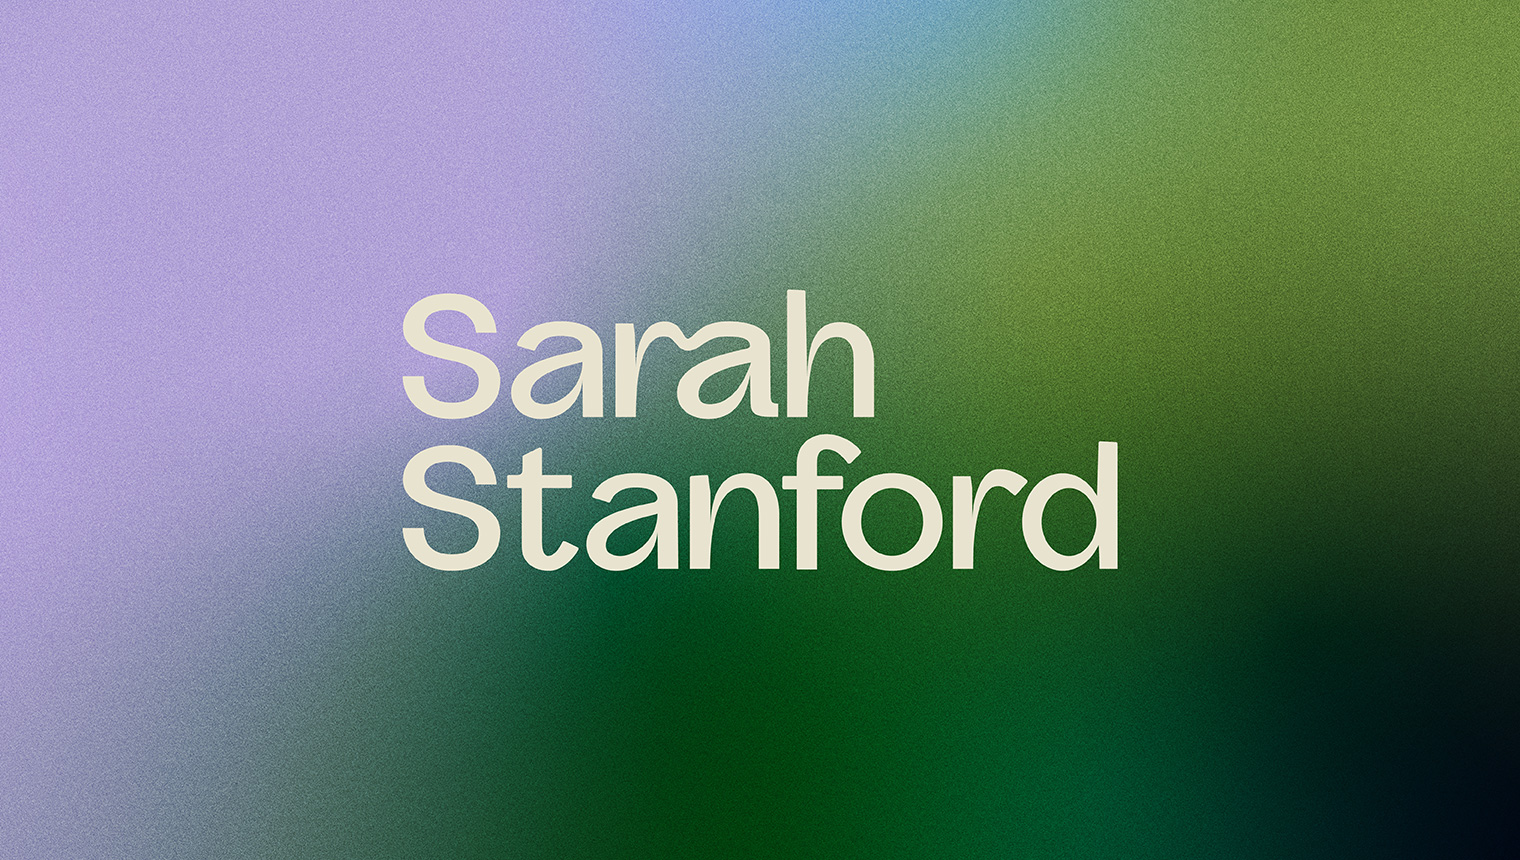 Rebranding case study thumbnail for Sarah Stanford showing the sans serif logo on a purple and green gradient background.